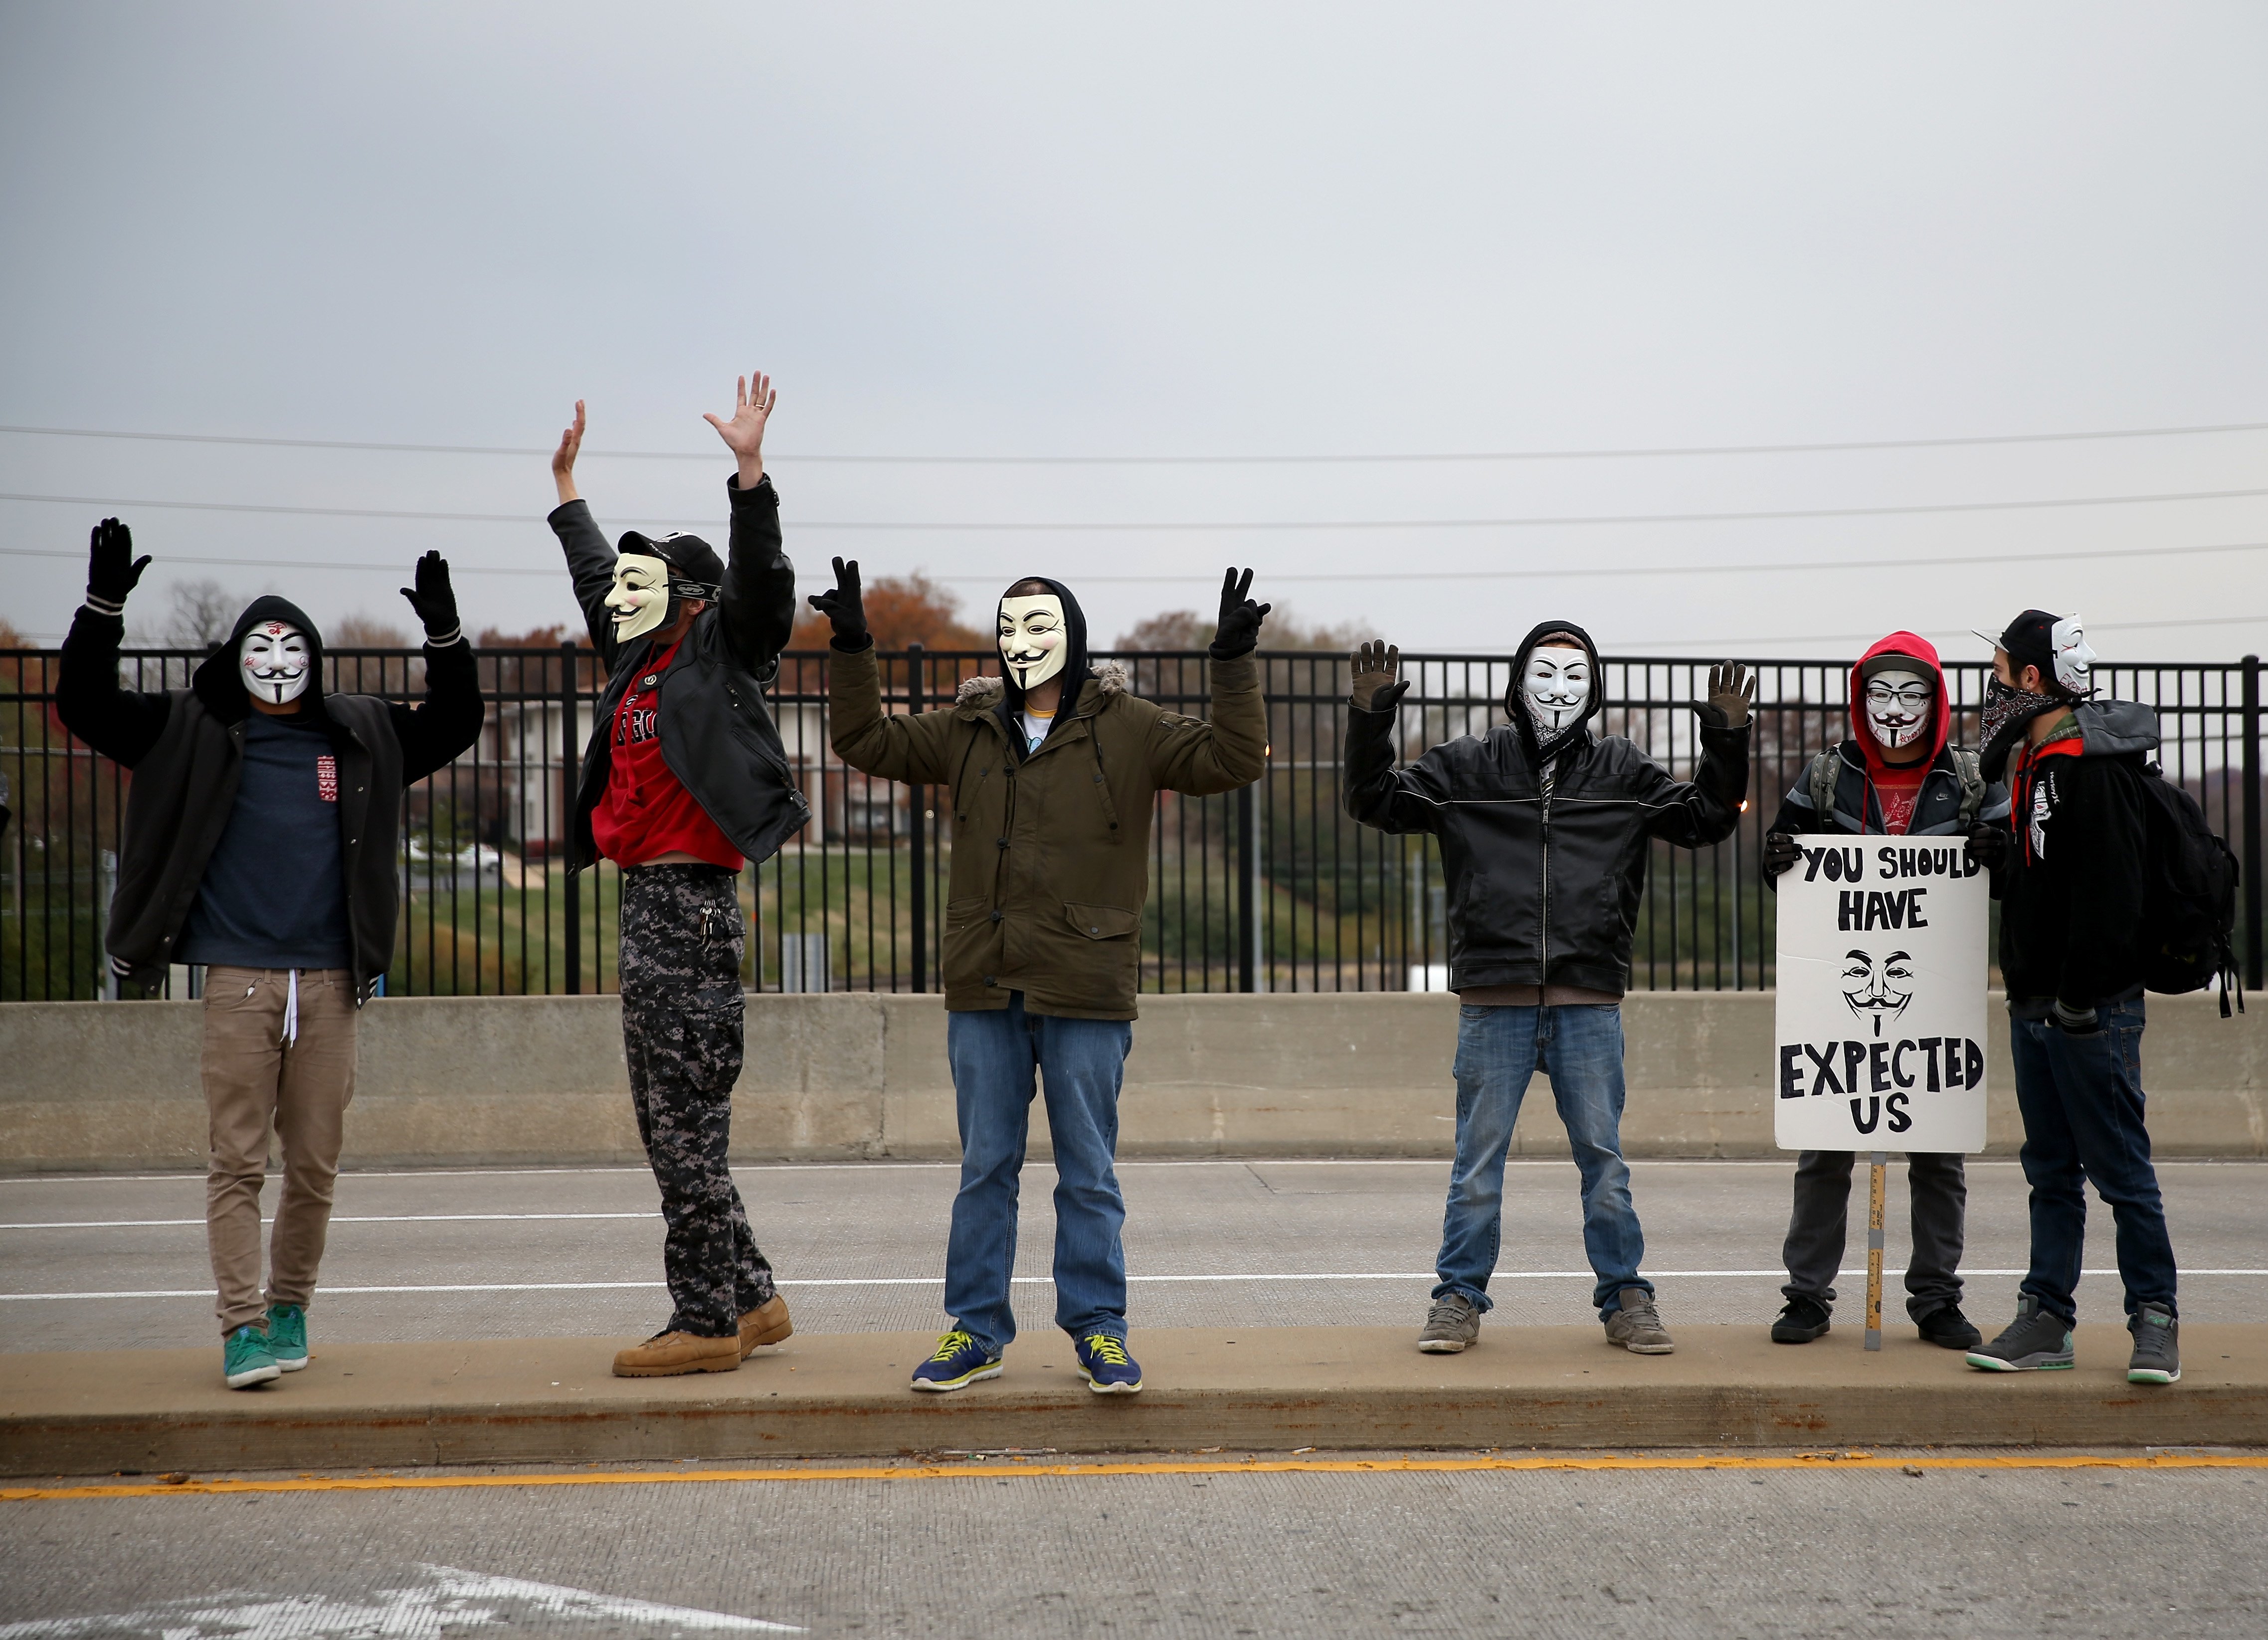 Demonstrators yell "Hands Up, Don't Shoot" alongside a highway overpass to voice their opinions as the area awaits a grand jury decision on Nov. 15, 2014 near Ferguson, Missouri.